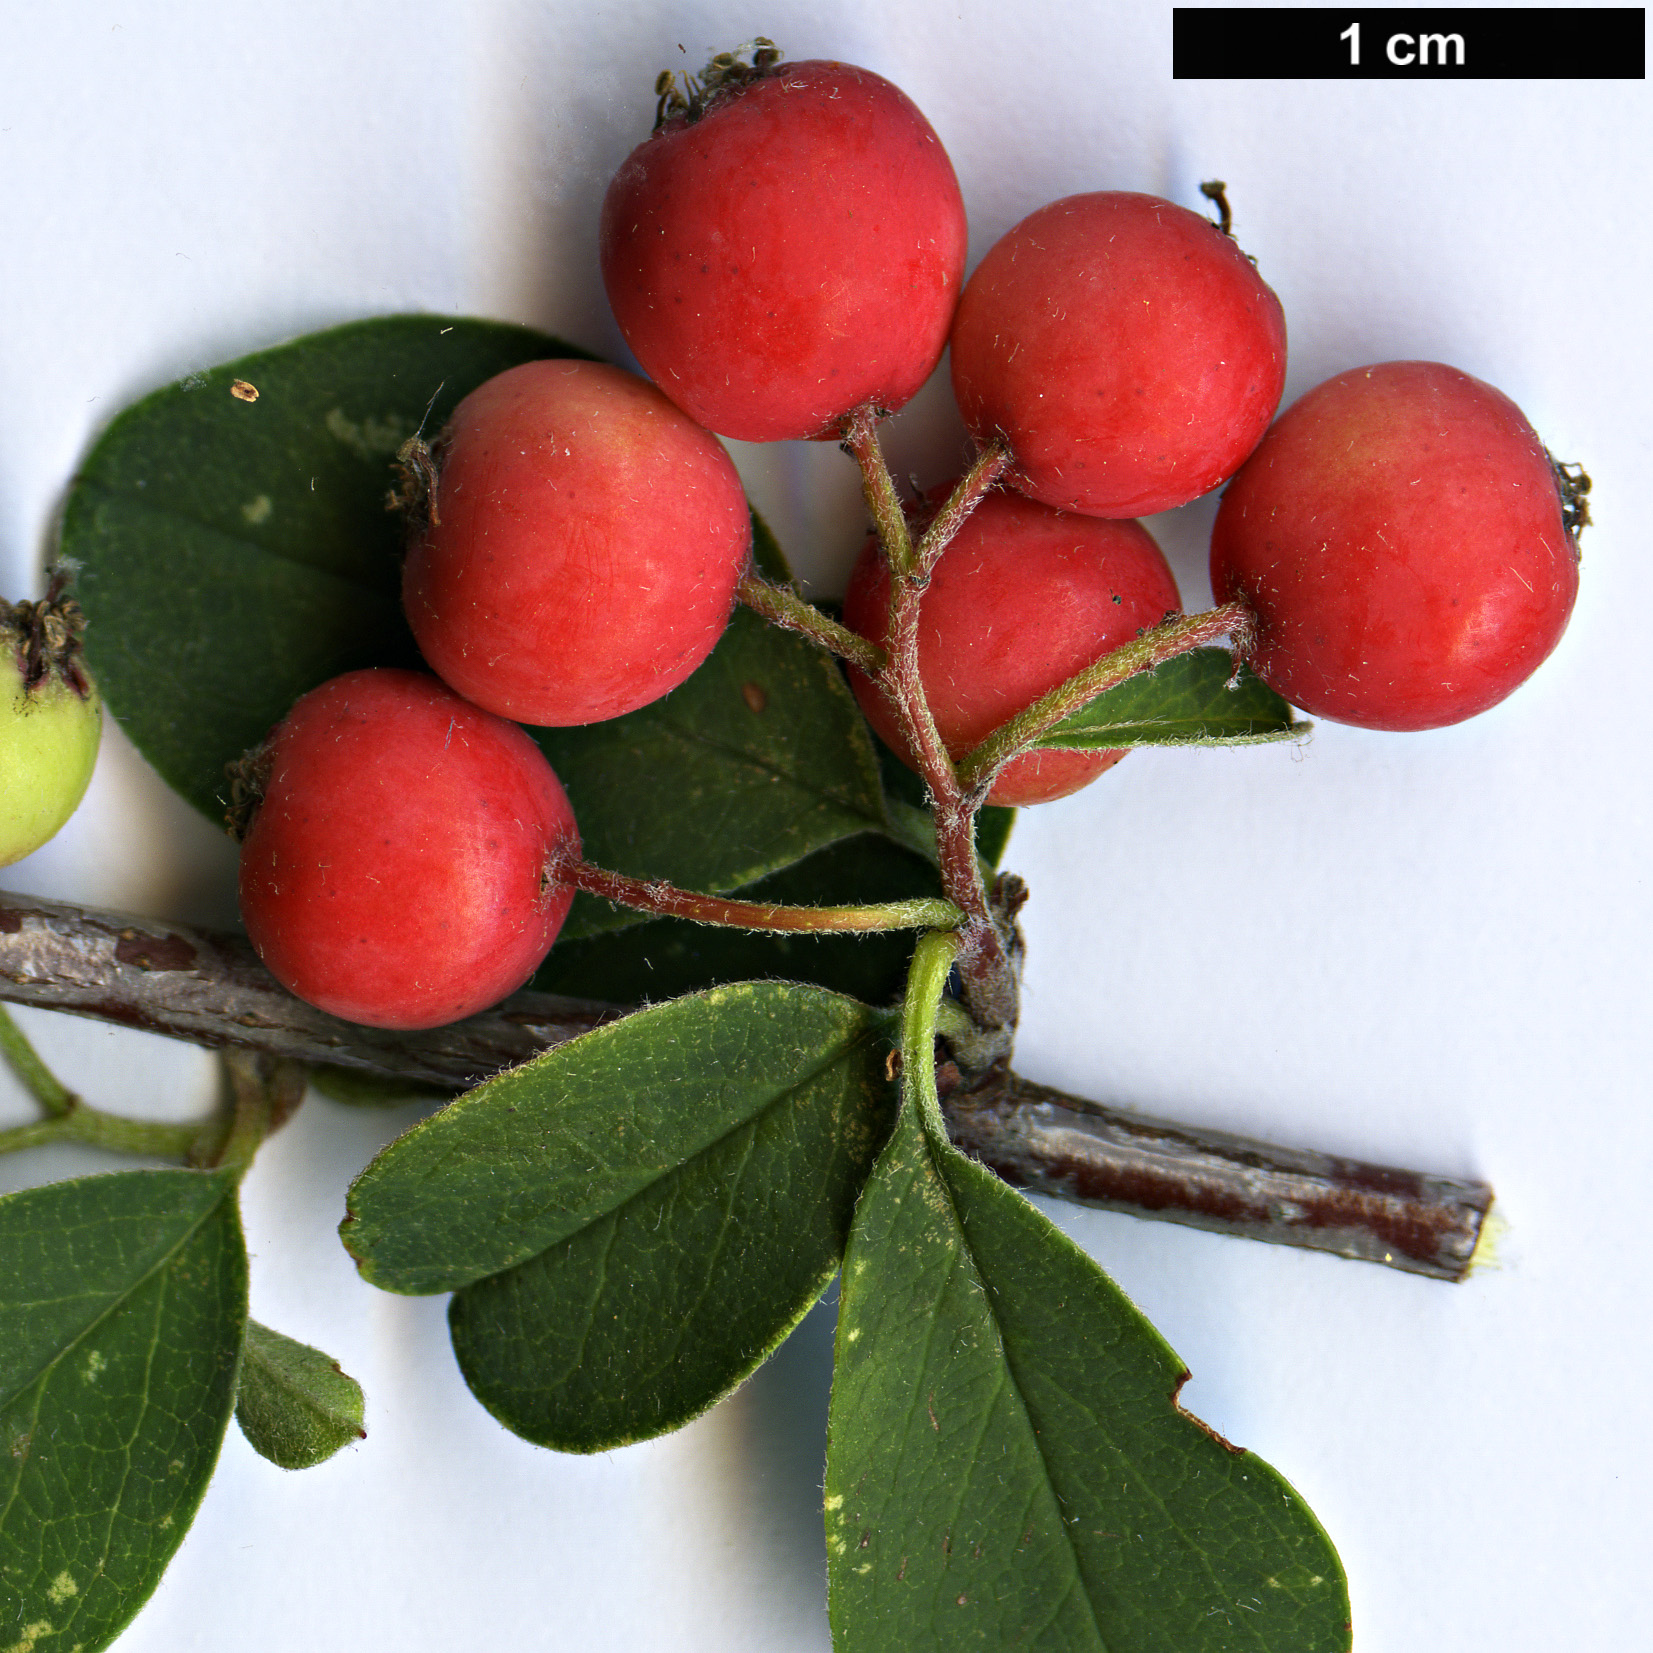 High resolution image: Family: Rosaceae - Genus: Cotoneaster - Taxon: chungtiensis